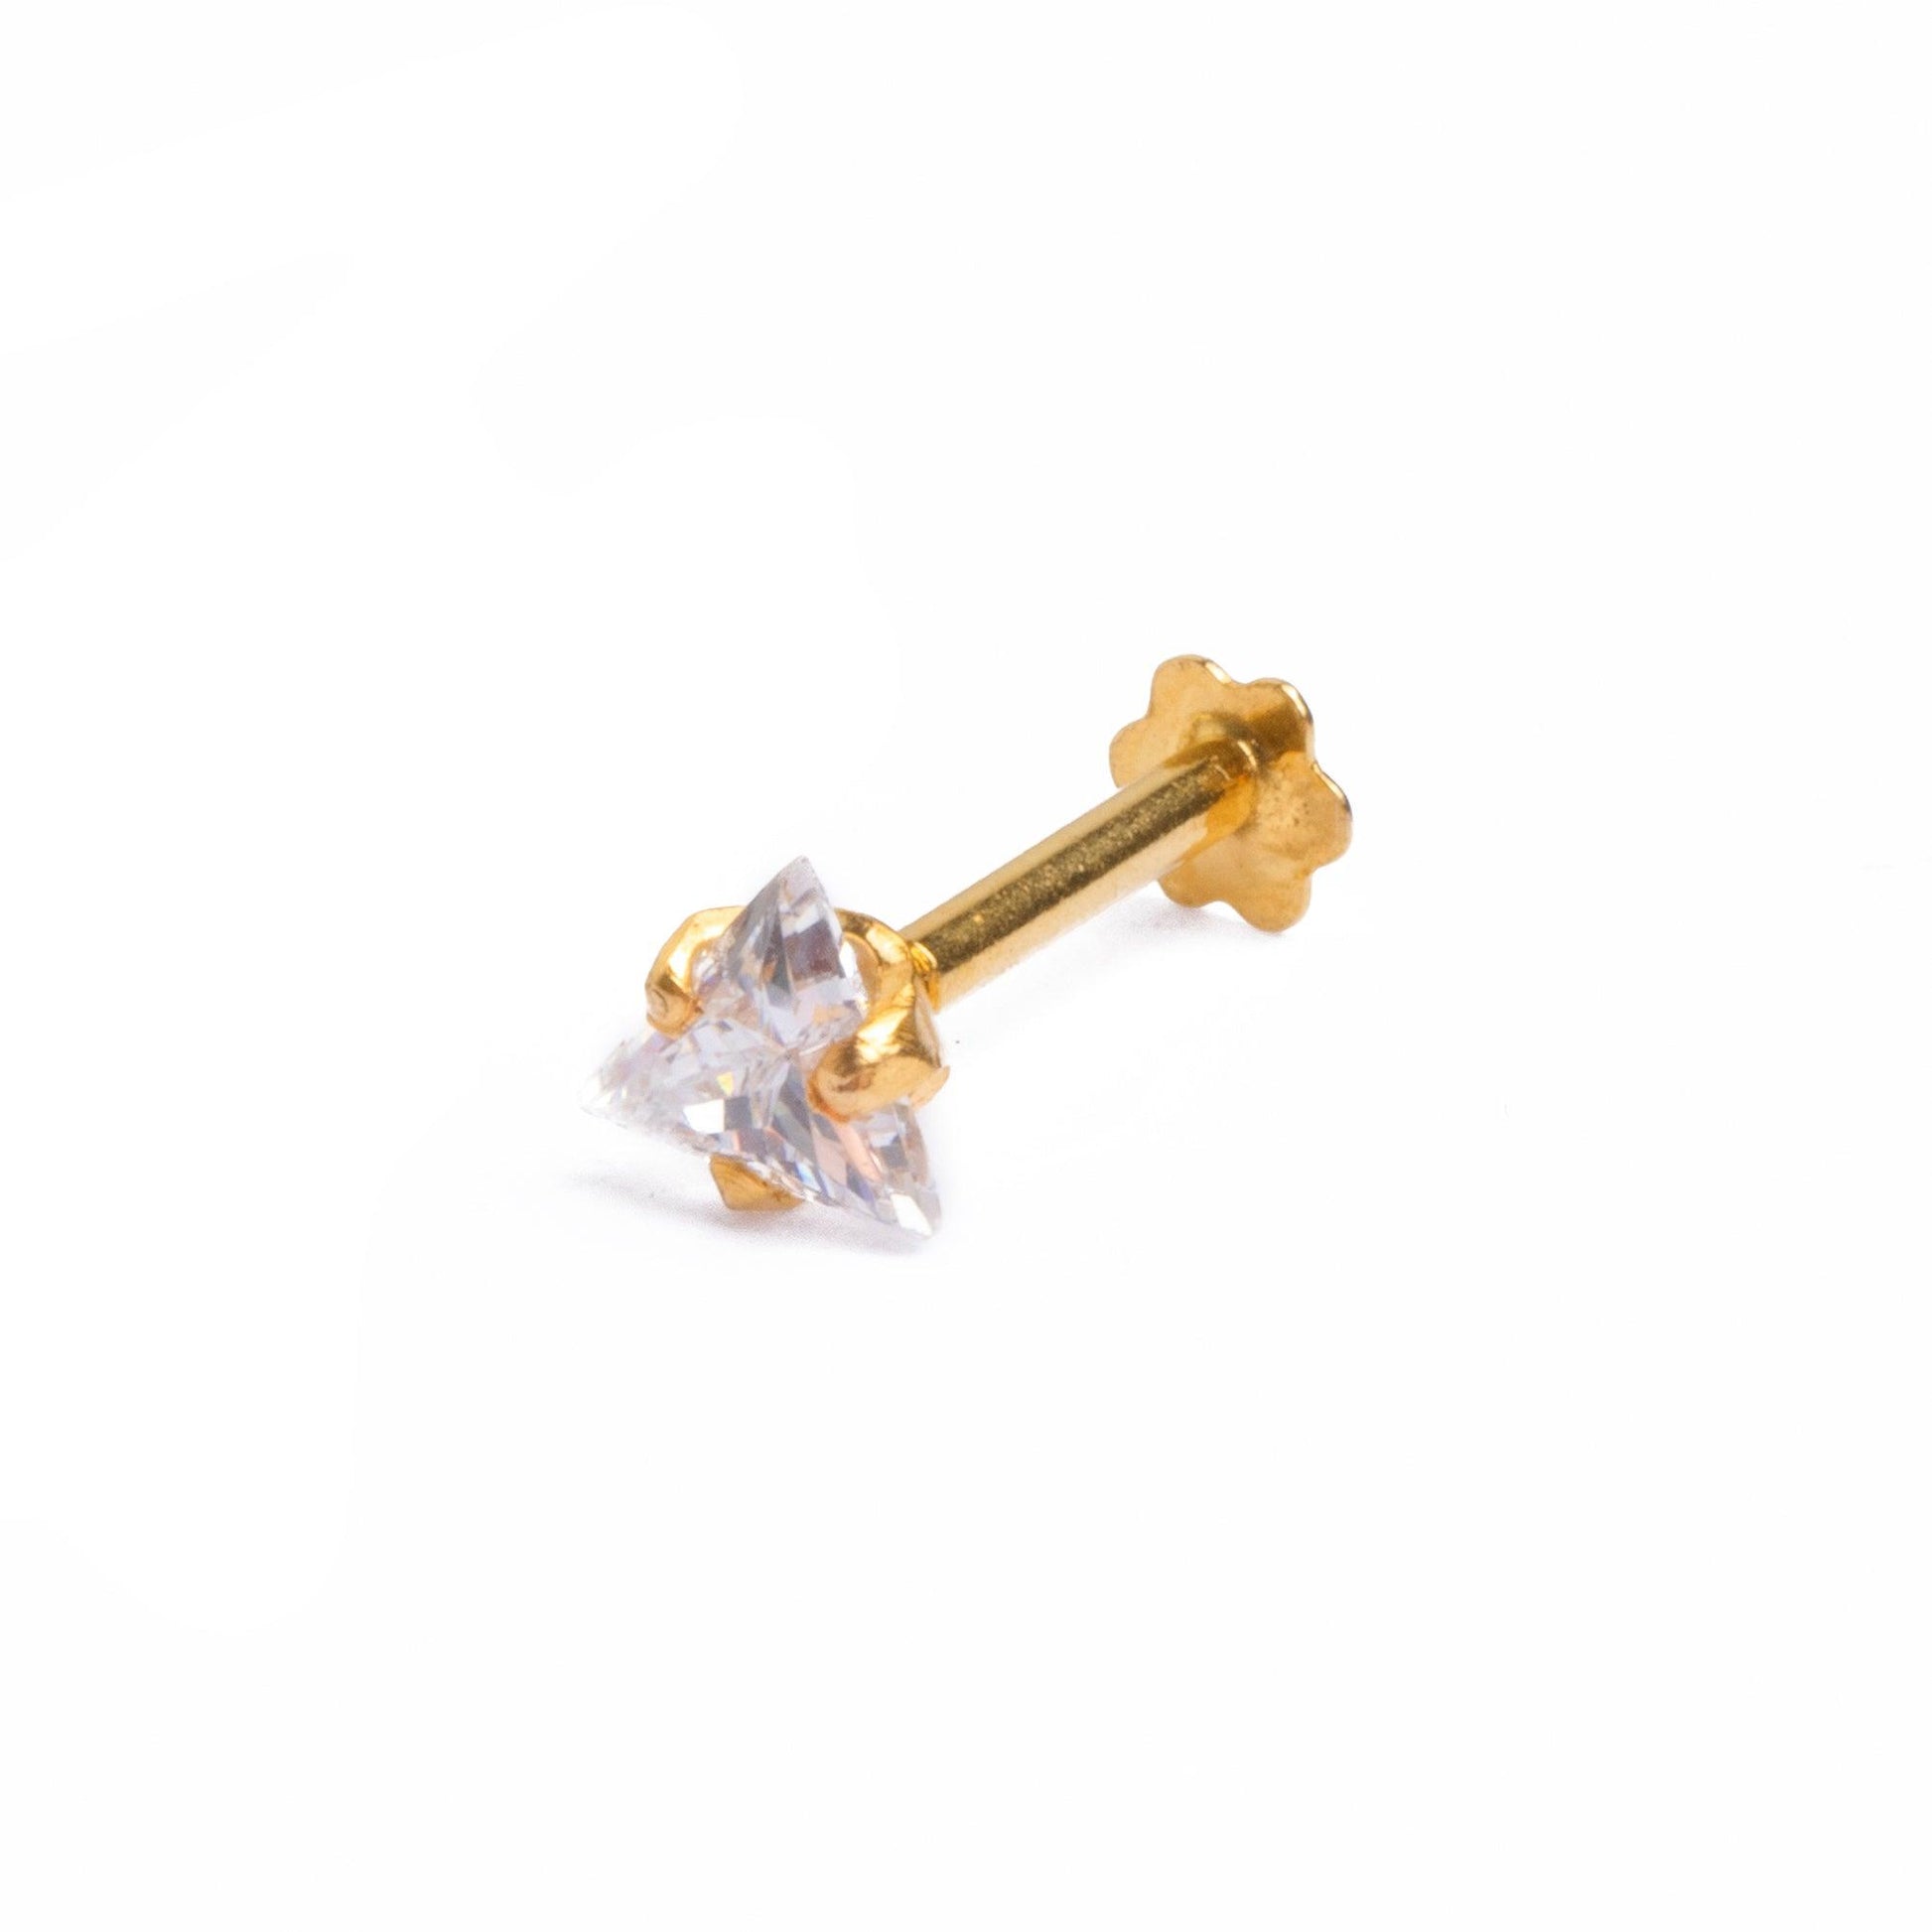 18ct Yellow Gold Screw Back Nose Stud set with a Triangular Shaped Cubic Zirconia NIP-4-120 - Minar Jewellers